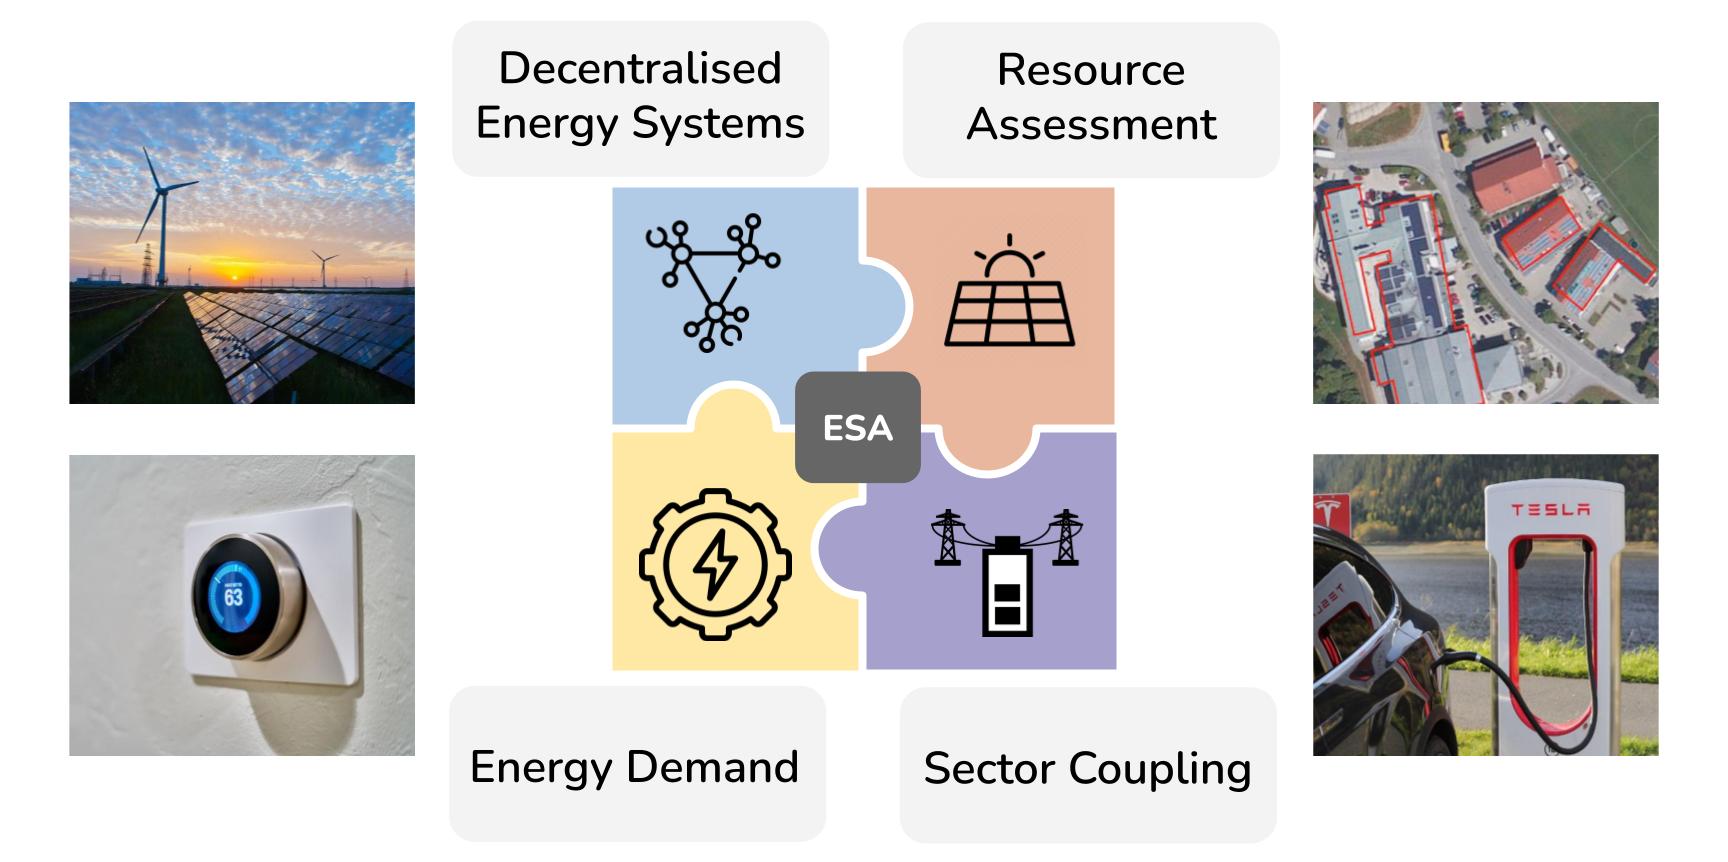 ESA Chair main research areas: Decentralised Energy Systems, Resource Assessment, Energy Demand and Sector Coupling